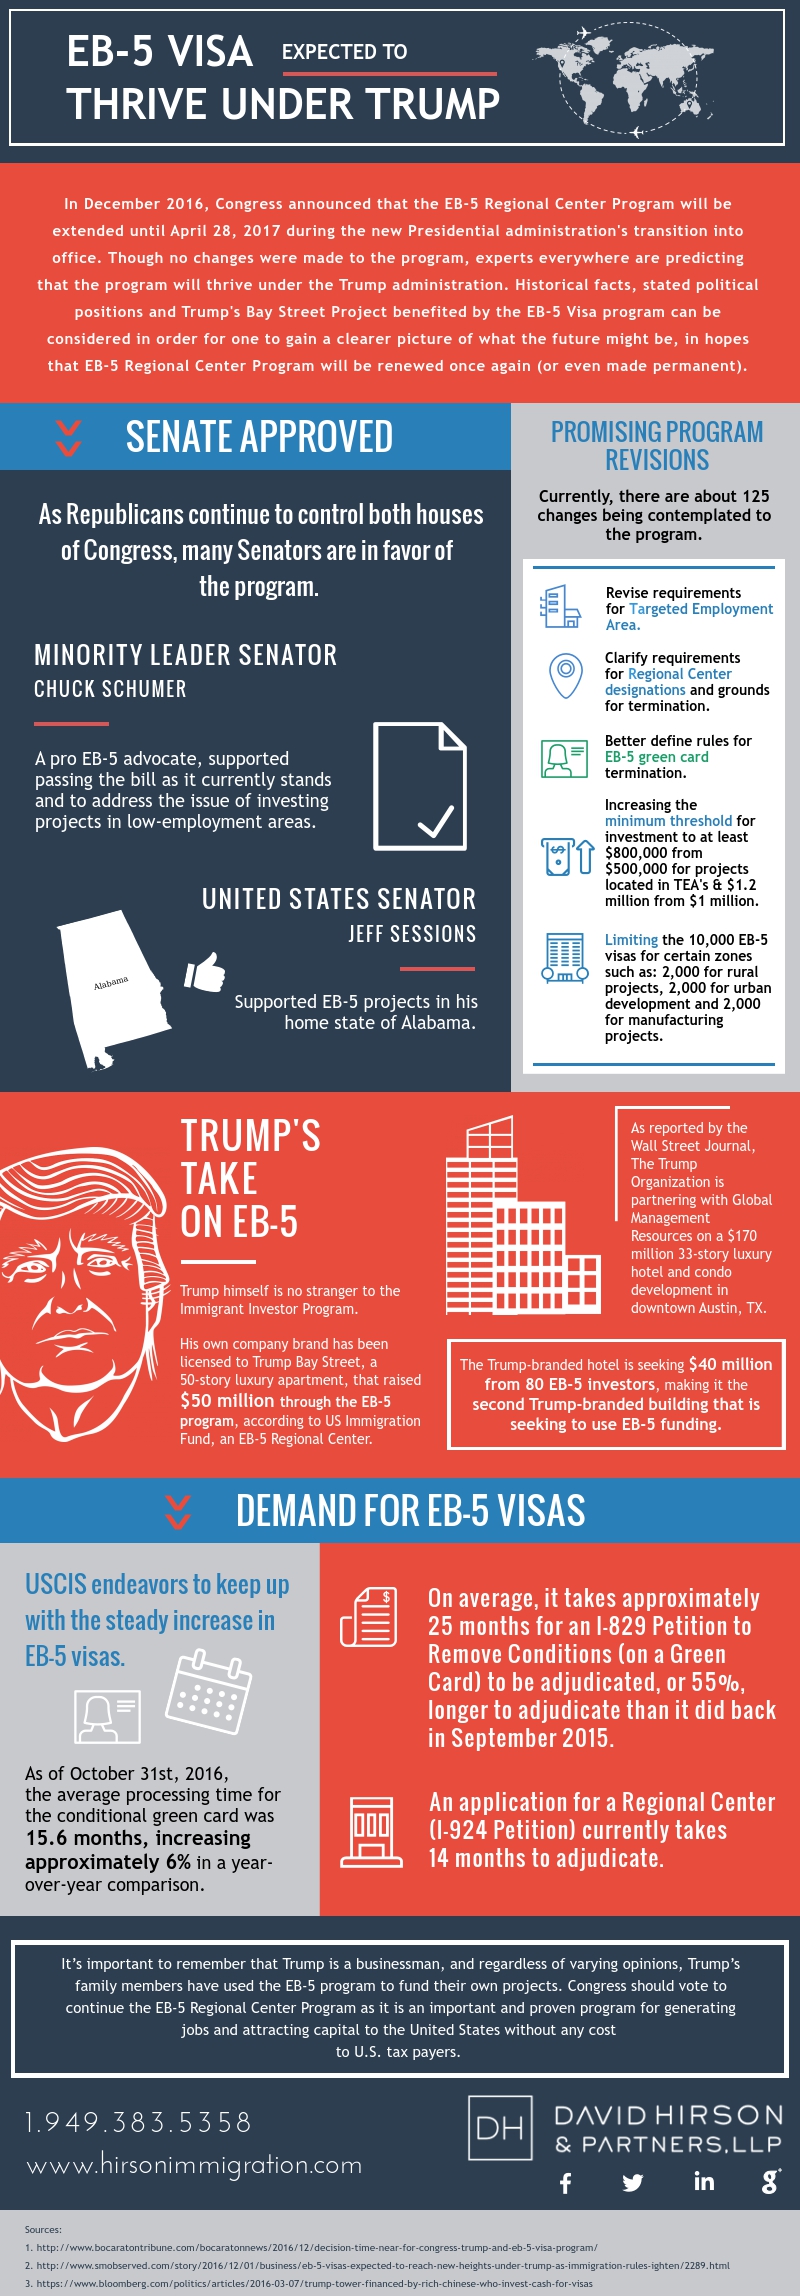 EB-5-Visa-Expected-to-Thrive-Under-Trump